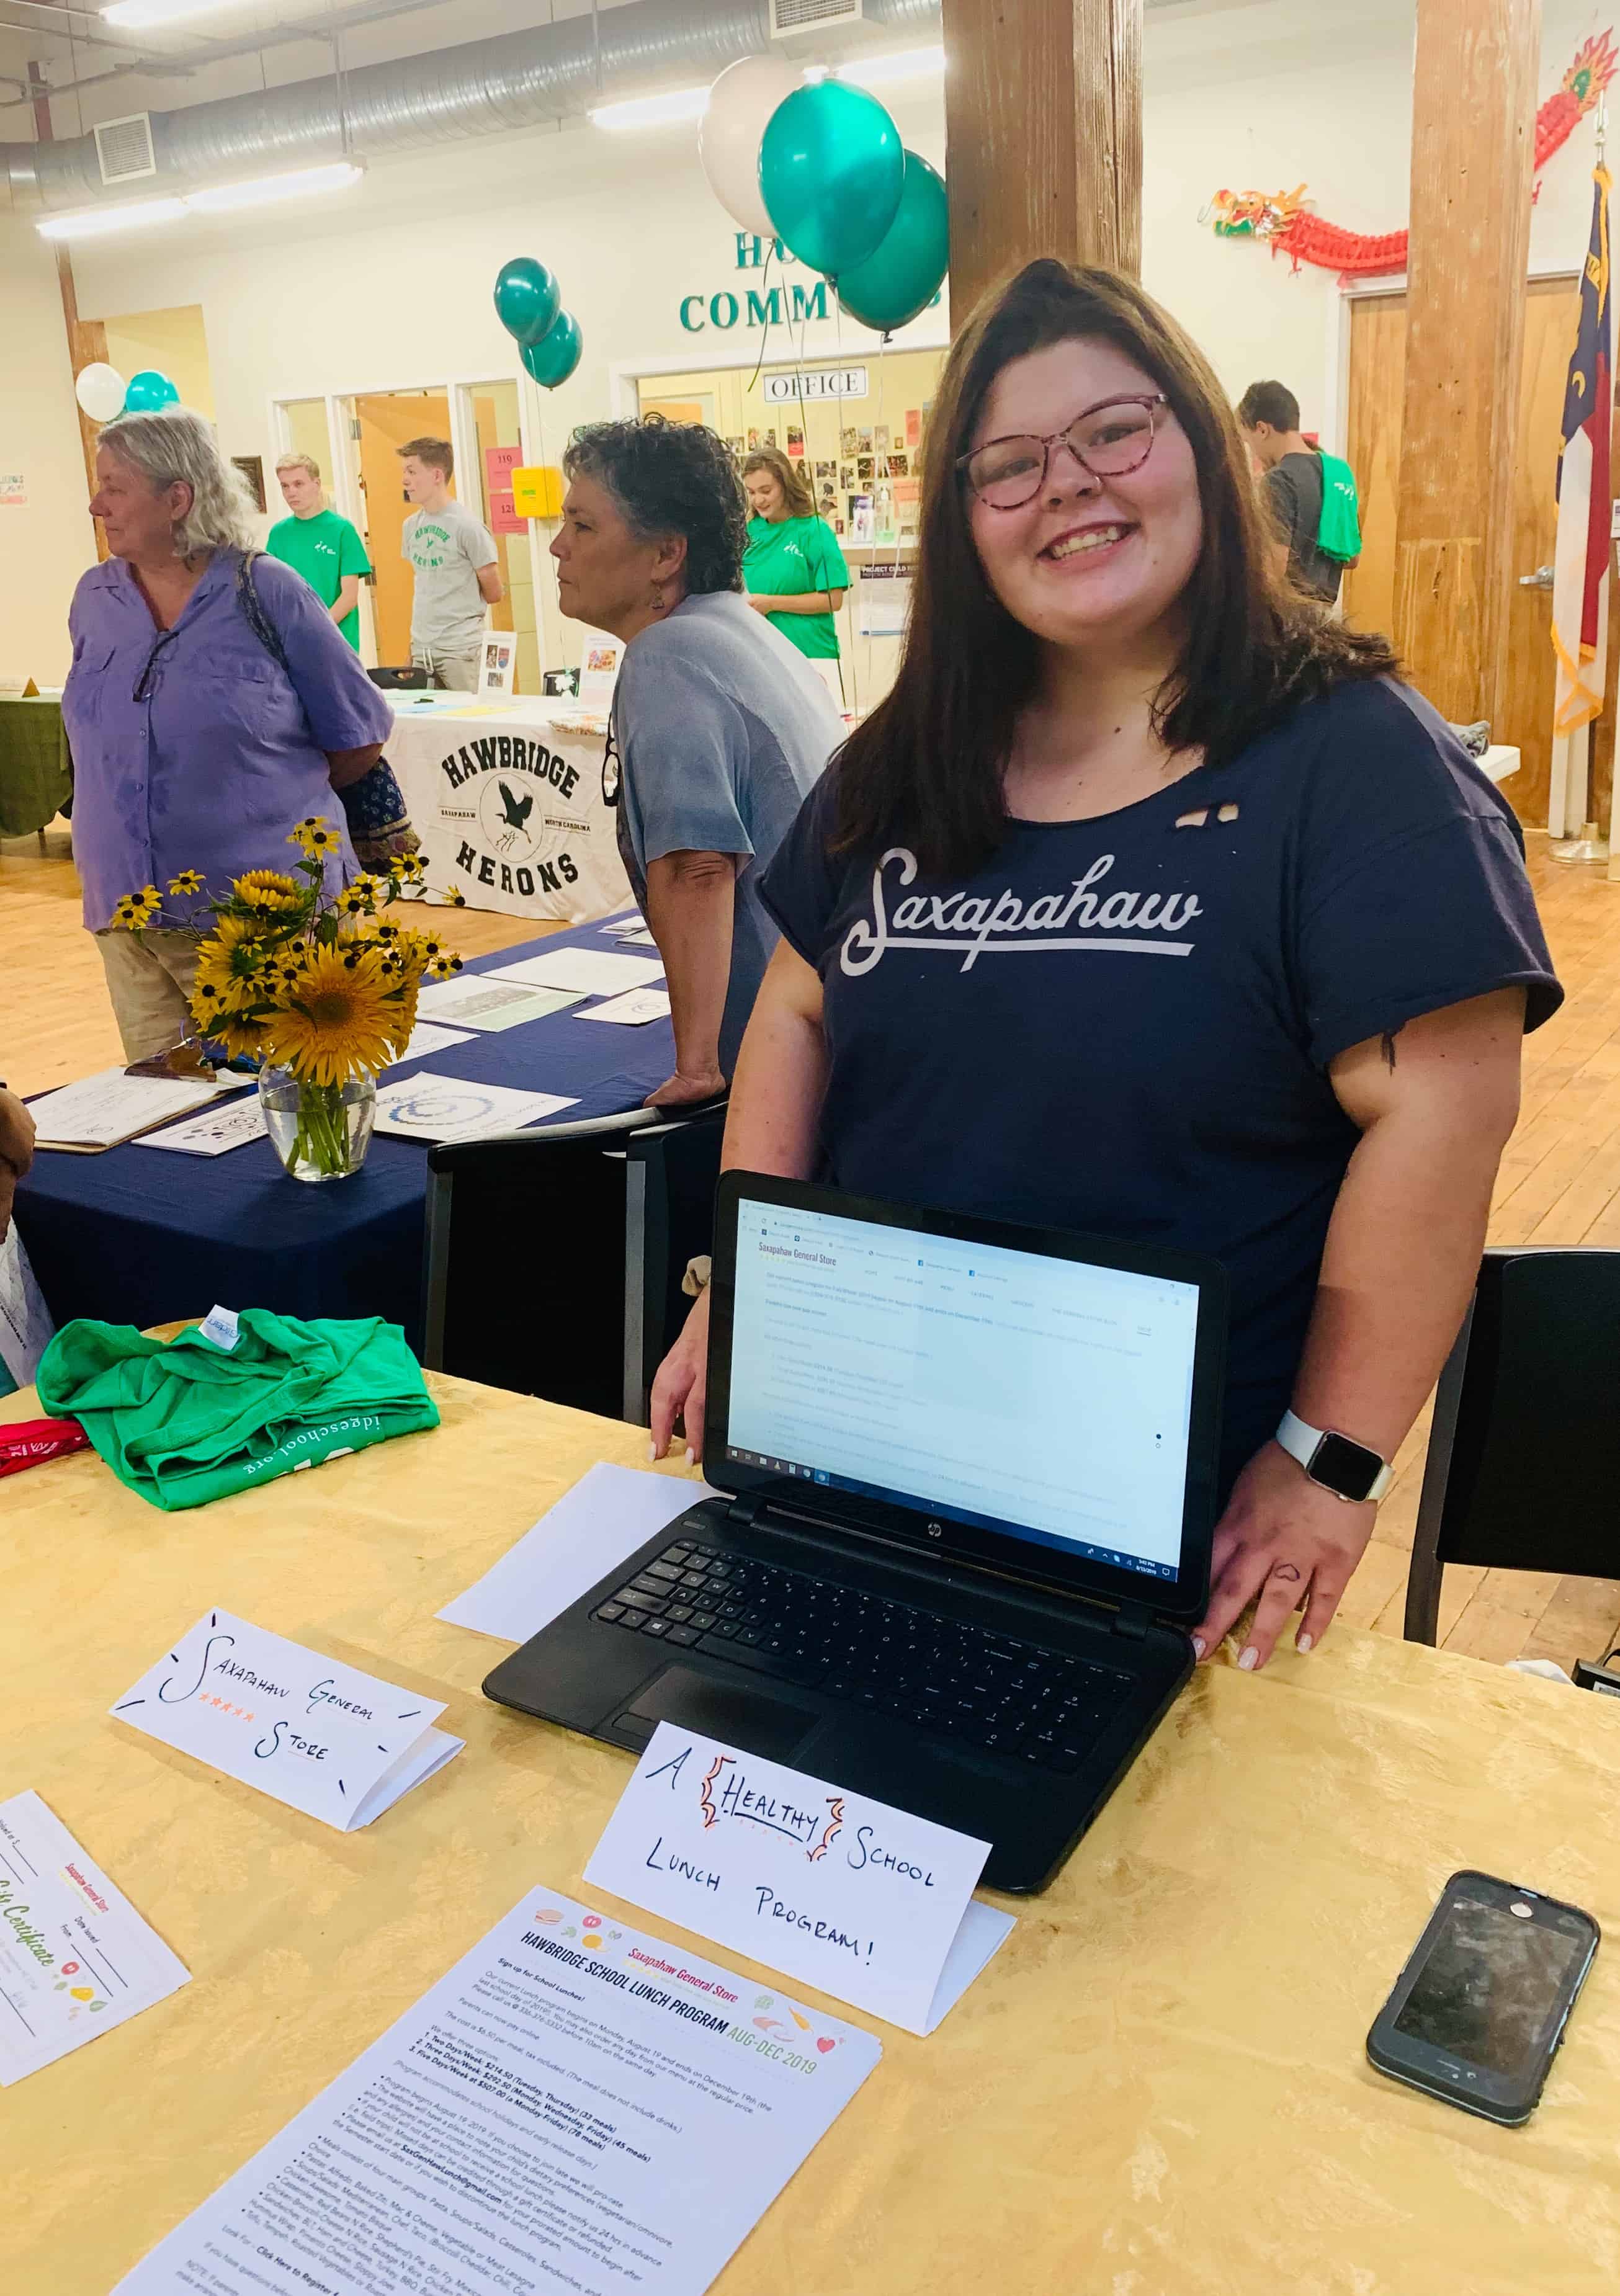 Amber, a former Hawbridge student, at this year's open house, ready to inform parents and students about the General Store's school lunch program